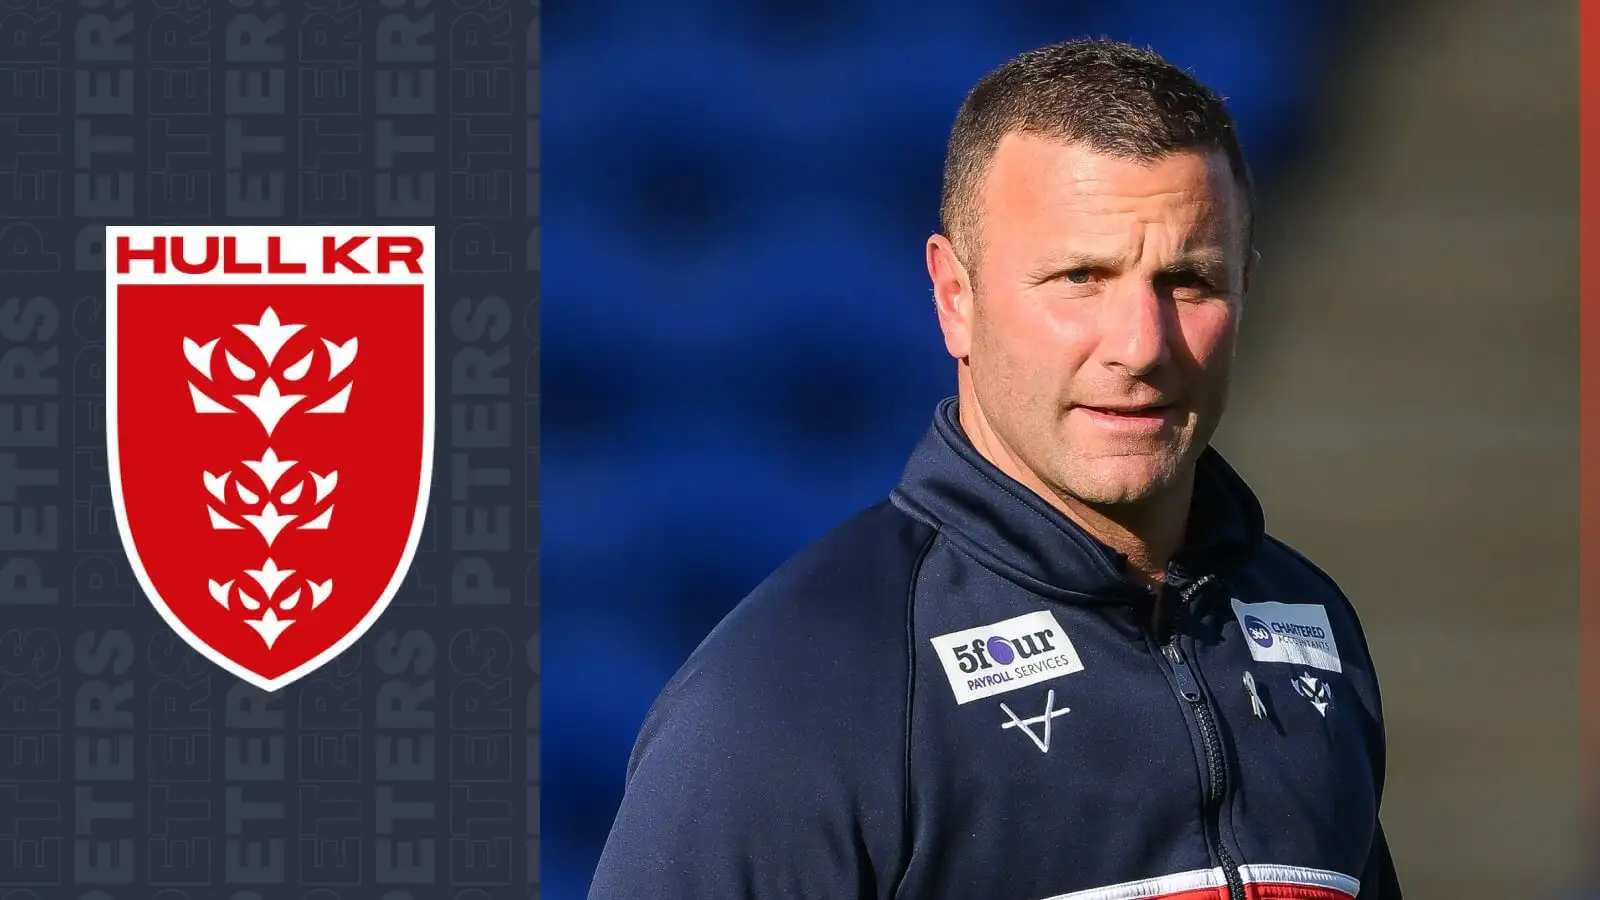 Hull KR exclusive: Willie Peters backs law changes surrounding concussion – ‘We’ve got to adapt and change’